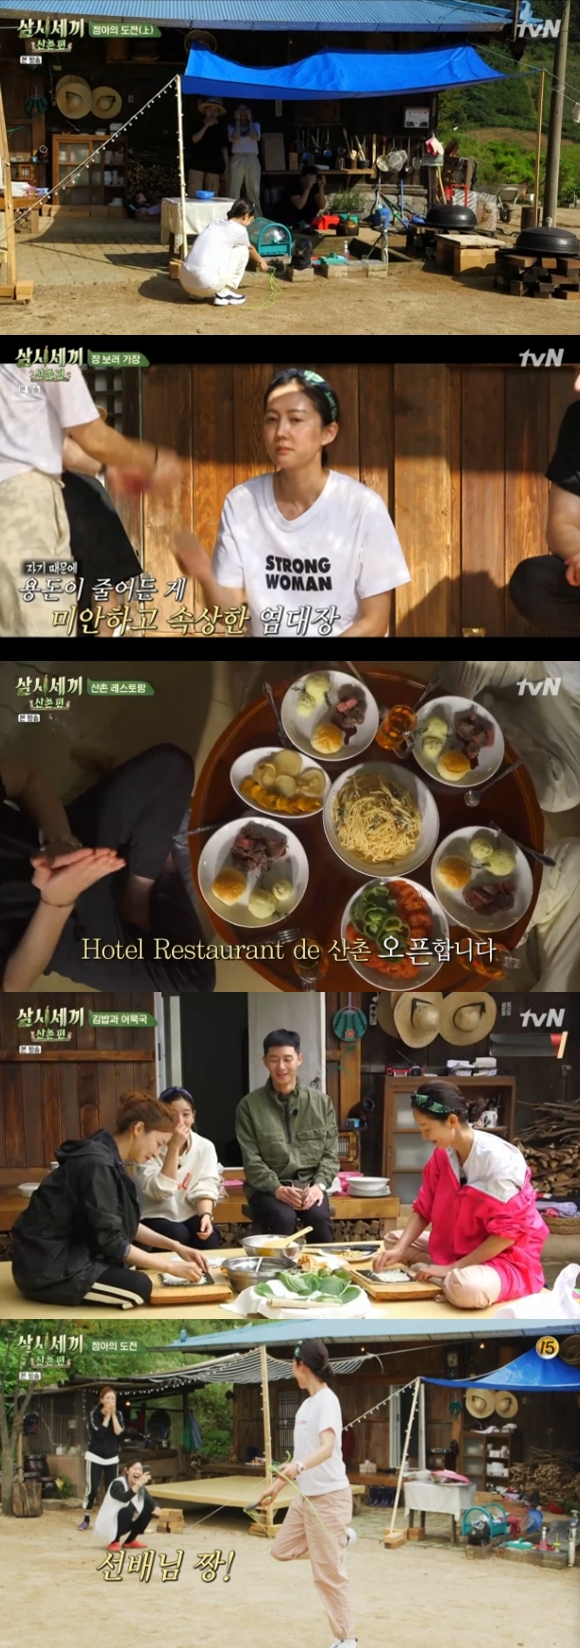 Yum Jung-ahs Jump rope journey ended with success.On TVN Three Meals a Day - Mountain Village, which aired on the 11th, three family members (Actor Yum Jung-ah, Yoon Se-ah, Park So-dam) and Park Seo-joon were portrayed, who successfully completed both the opening of mountain village restaurants and the Jump Rope bet.Yum Jung-ah, who was betting 10 times over Jump rope with 10,000 won, failed sadly in the first Top Model.However, Yum Jung-ah told the production team that he would practice today and succeed 12 times tomorrow and I will come to the lost money.Yum Jung-ah set up a Jump rope strategy while going to see the chapter and burned his will for success.Yum Jung-ah said, Is this going to happen because of 12?Park Seo-joon, who watched this, went to Kochi dedicated to Jump rope for Yum Jung-ah.The crew, including the Yoon Se-ah and Park So-dam, tried to put up with laughter at the failed Yum Jung-ah on the Jump rope.After a full-time Jump rope practice, Park Seo-joon opened a mountain village restaurant.Park Seo-joon decided to prepare steak and blue pasta with ingredients from the city.Yum Jung-ah, Yoon Se-ah, and Park So-dam, who decided to trust Park Seo-joon as the main chef when preparing for dinner, helped him by pouring various questions to Park Seo-joon.When Park Seo-joon was embarrassed by the question offensive, Na Young-Seok PD laughed, saying, He was a child who only assisted.But Park So-dam cheered Park Seo-joon, saying, The chef should be fully believed.Park Seo-joon completed the Kobong Myeongran Pasta, which did not spare any ingredients in line with the taste of the big hand family.I think Ive become a cook, he said, putting the mountain-cold Pasta on the table.Thanks to the sincerity of ripening steak meat from home, Park Seo-joons menu was as successful as the Vietnamese food that Onara prepared.Yoon Se-ah expressed satisfaction, saying, I originally ate this kind of kimchi, but I ate it well without it.Park So-dam also thanked Park Seo-joon once again, saying, I will eat steak and pasta here.Park Seo-joon made a special night meal as well as dinner to the three families and showed the Main Chef aspect.Meanwhile, the moment of showdown came for Yum Jung-ah.The three families who had breakfast with Kimbap and fish cake soup and Park Seo-joon realized that they had to make money with Jump rope of Yum Jung-ah while planning to go to the market.Yum Jung-ah was also worried, stopping chopsticks for fear of losing another piece of money.Yoon Se-ah and Park Seo-joon said, Lets go to the bottom of the body and go to the heart that there is nothing to lose.Yum Jung-ah hid in the backyard behind the crew and opened up the final practice, while Park Seo-joon burned the coaching until the end.But Na Young-Seok PD changed his words again.Twelve are yesterdays work, and todays 16 is the top model. Kochi Park Seo-joon was busy protecting the player, saying, The ground is not good.Park So-dam also persuaded Na Young-Seok PD that the senior has a bad back.However, PD stimulated Yum Jung-ah by listening to the children to watch the broadcast, and the three families including Yum Jung-ah were tongued in the creepy childishness of the production team.But I had no choice but to see the chapter.Yum Jung-ah decided on Top Model with 16 goals, and Yoon Se-ah and Park So-dam encouraged her by giving a hug and kissing baptism to Yum Jung-ah, who was about to play.Yum Jung-ahs second Top Model was a success; Yum Jung-ah, who had 16 first-team runs, enjoyed the joy of success.The four of them went out to the last mountain village with the money they got so much, and went to the last shopping.Three Meals a Day - Mountain Village, which depicts the life of a mountain village where Yum Jung-ah, Yoon Se-ah, and Park So-dam leave for Jeongseon, Gangwon Province, is broadcast every Friday at 9:10 pm on tvN.Photo: TVN Three Meals a Day - Mountain Village broadcast screen capture